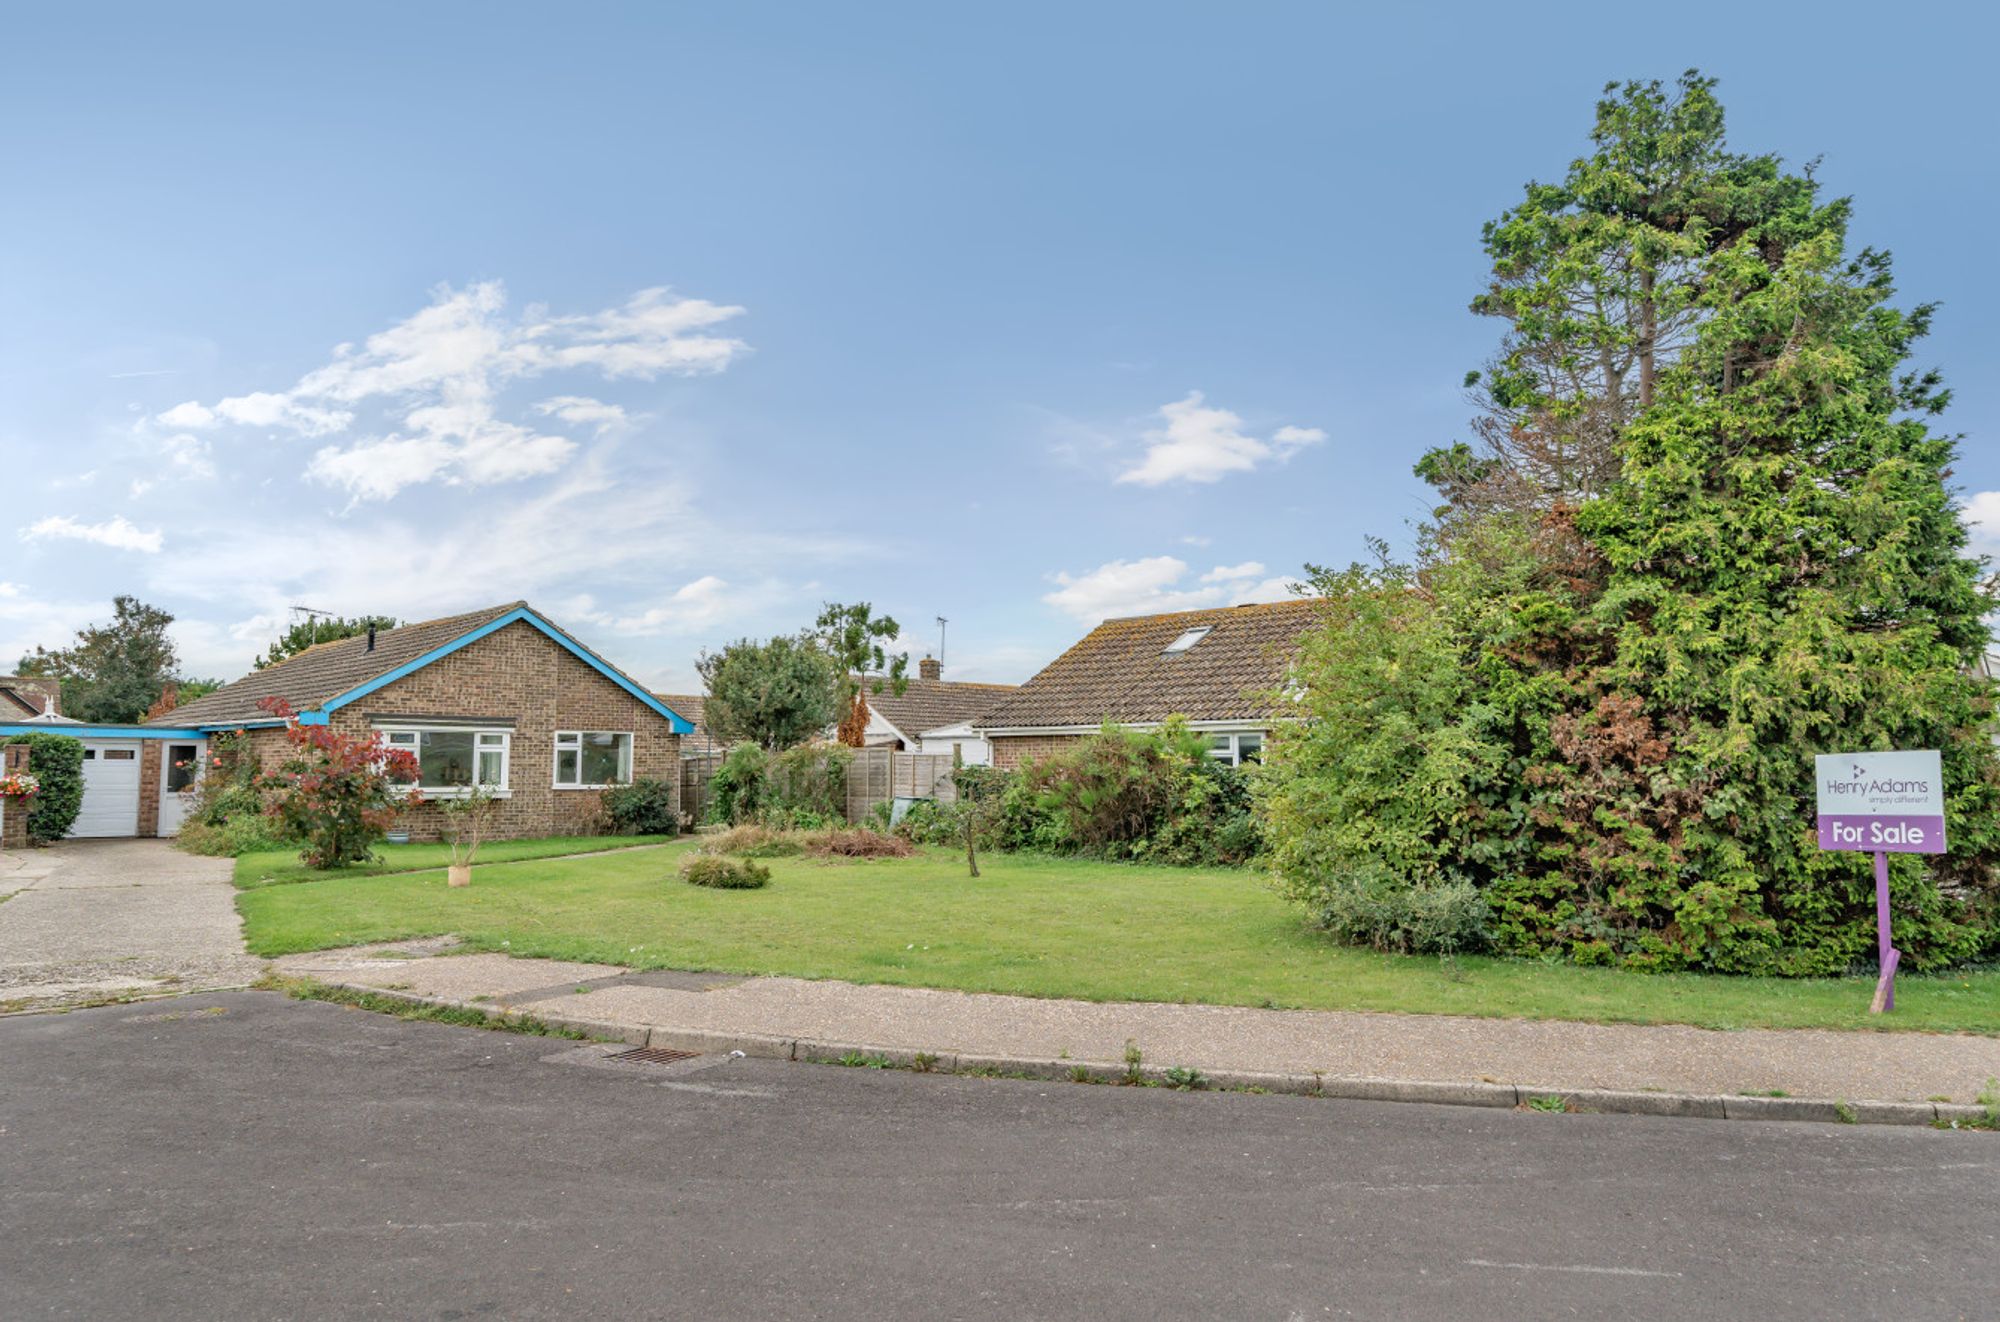 Large Acres, Selsey, PO20